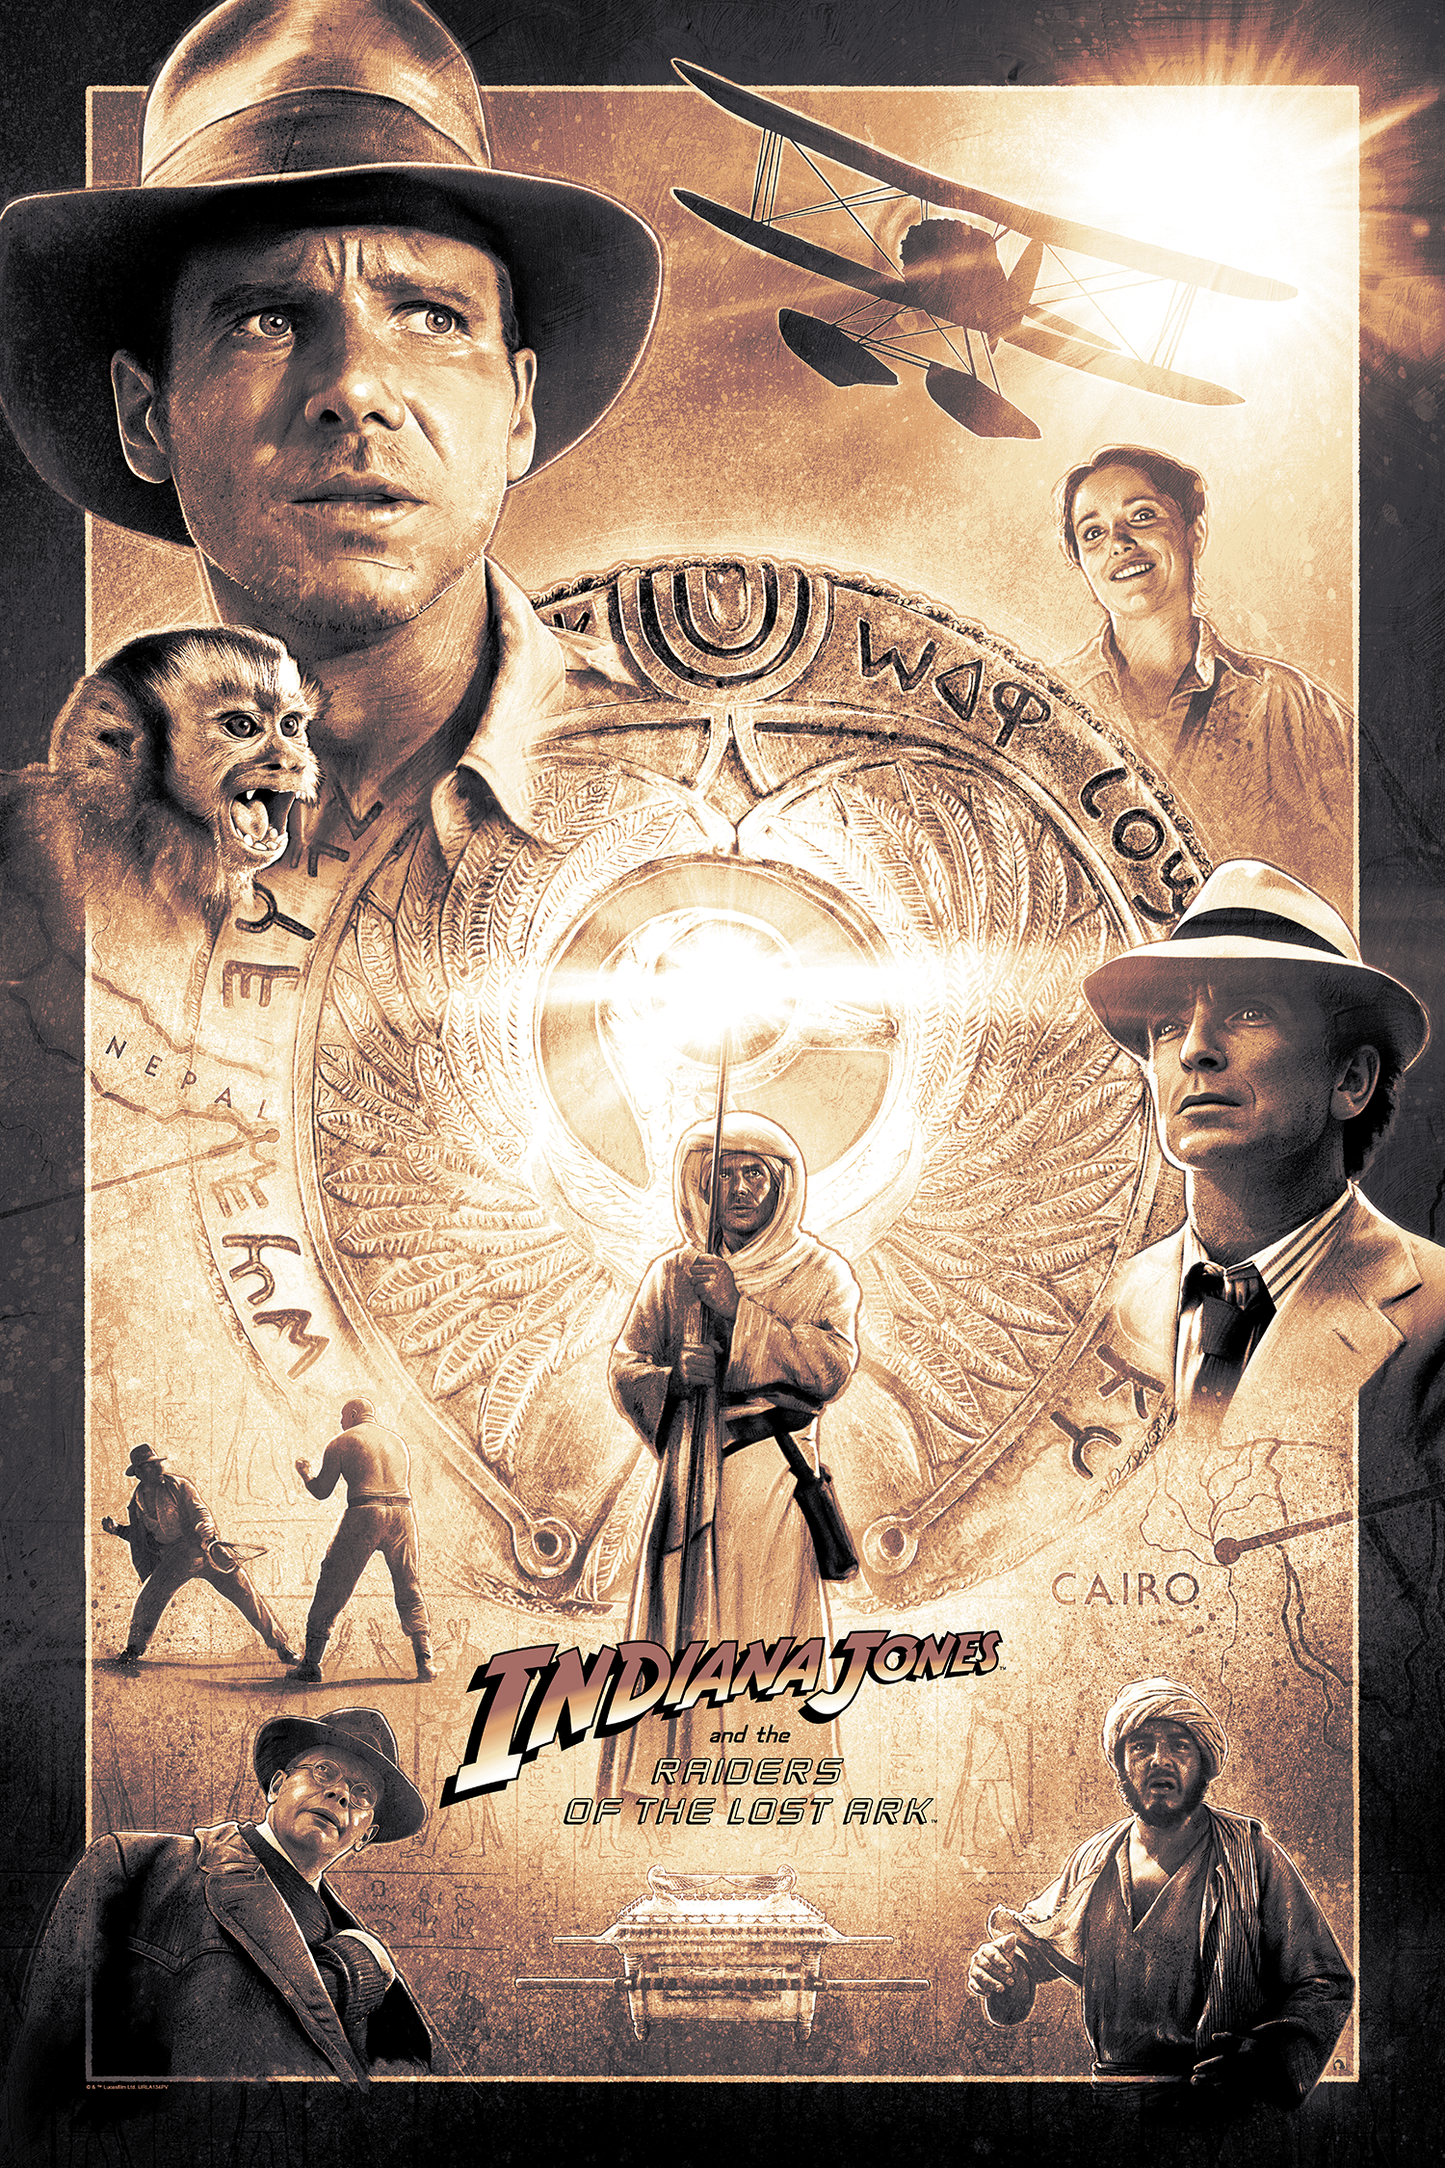 Kevin Wilson "Raiders of the Lost Ark (Passing Through History)" Variant